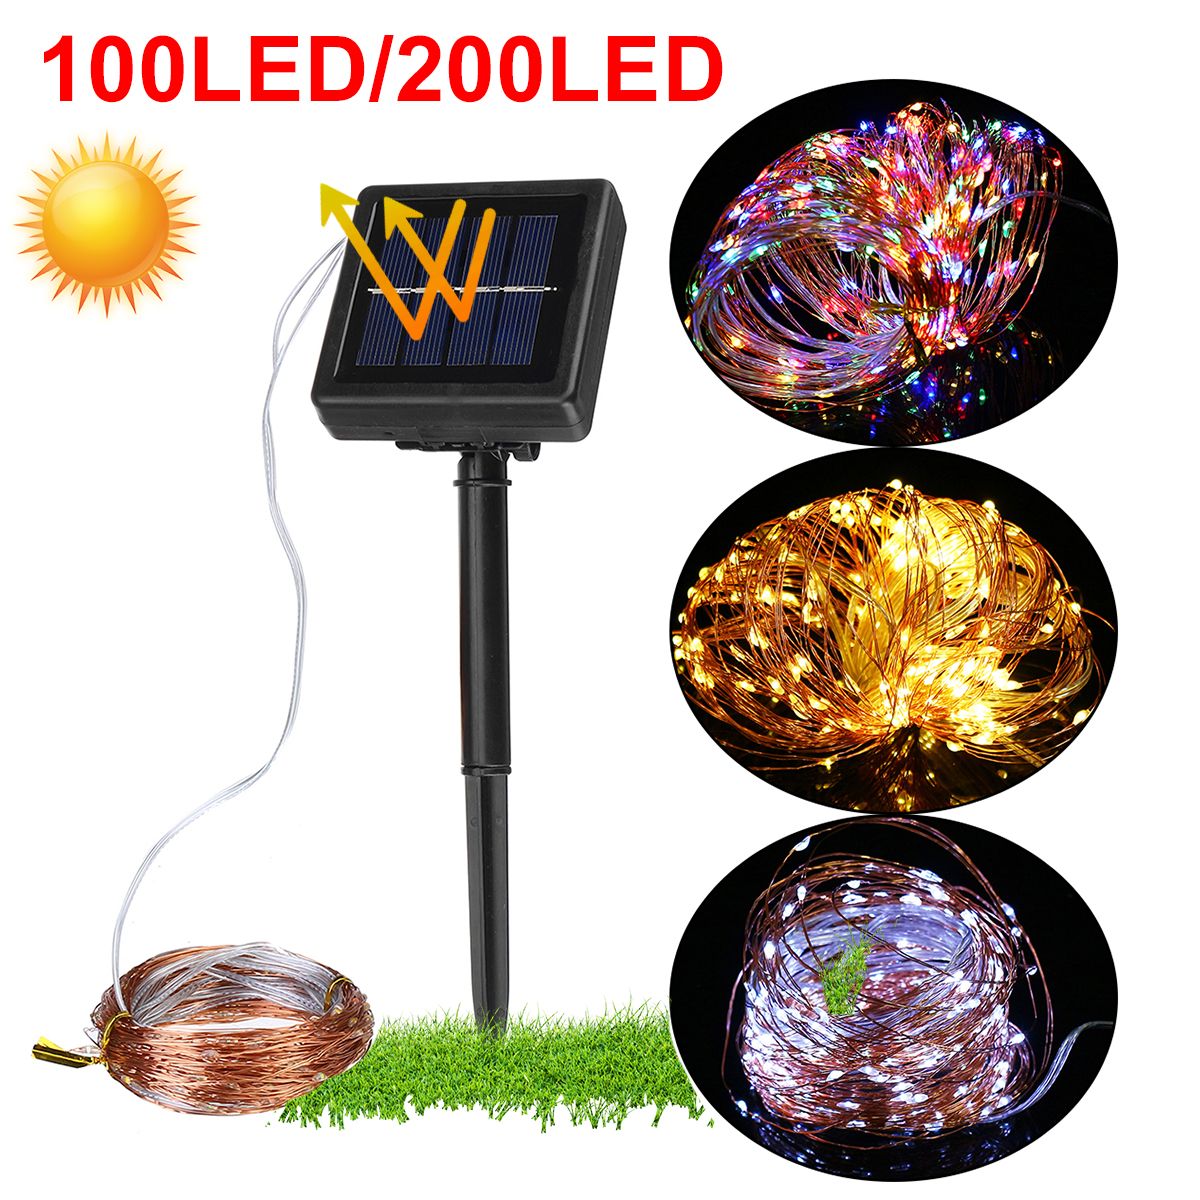 12M-22M-LED-Solar-Power-String-Light-8-Modes-Copper-Wire-Fairy-Outdoor-Garden-Waterproof-Holiday-Dec-1713762